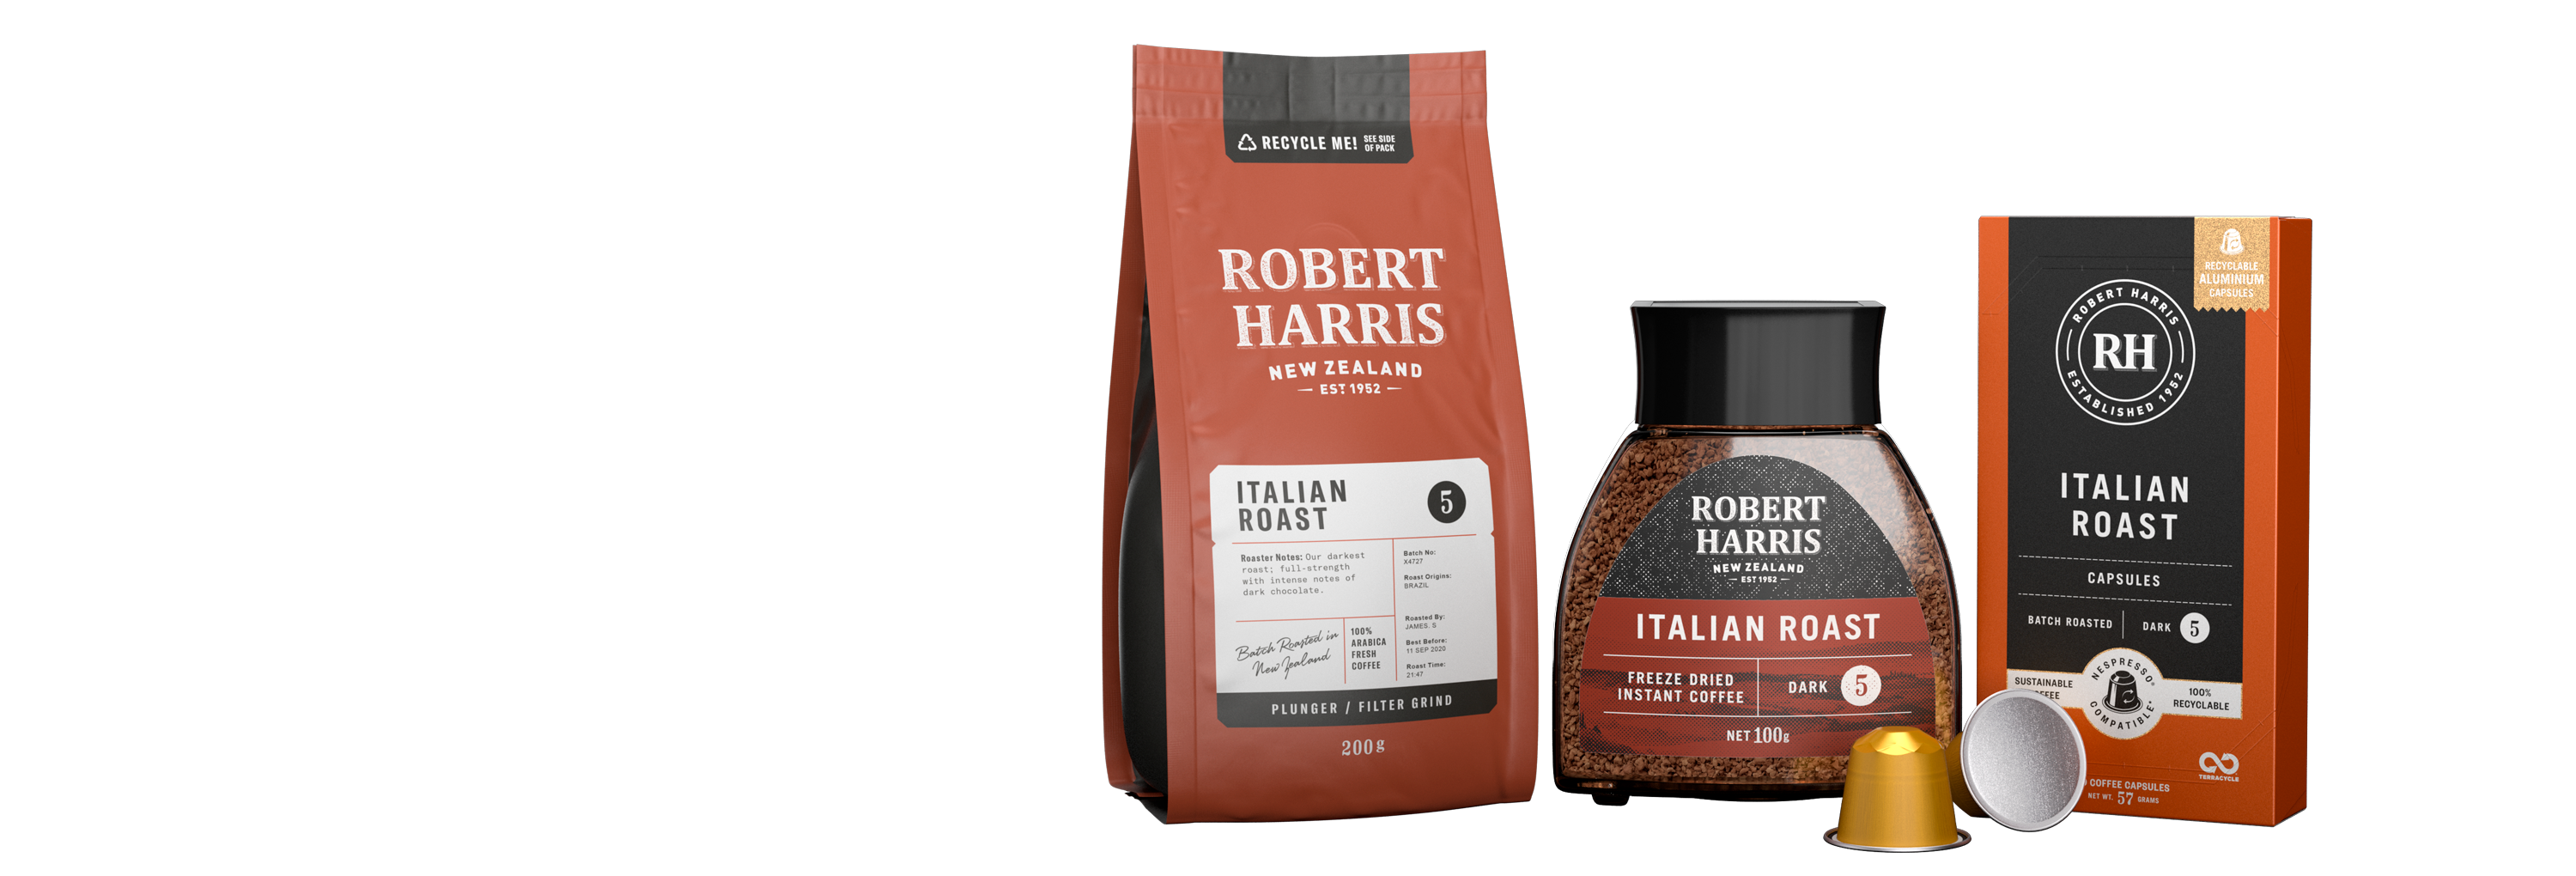 Our Coffee Products | Robert Harris Coffee Roasters